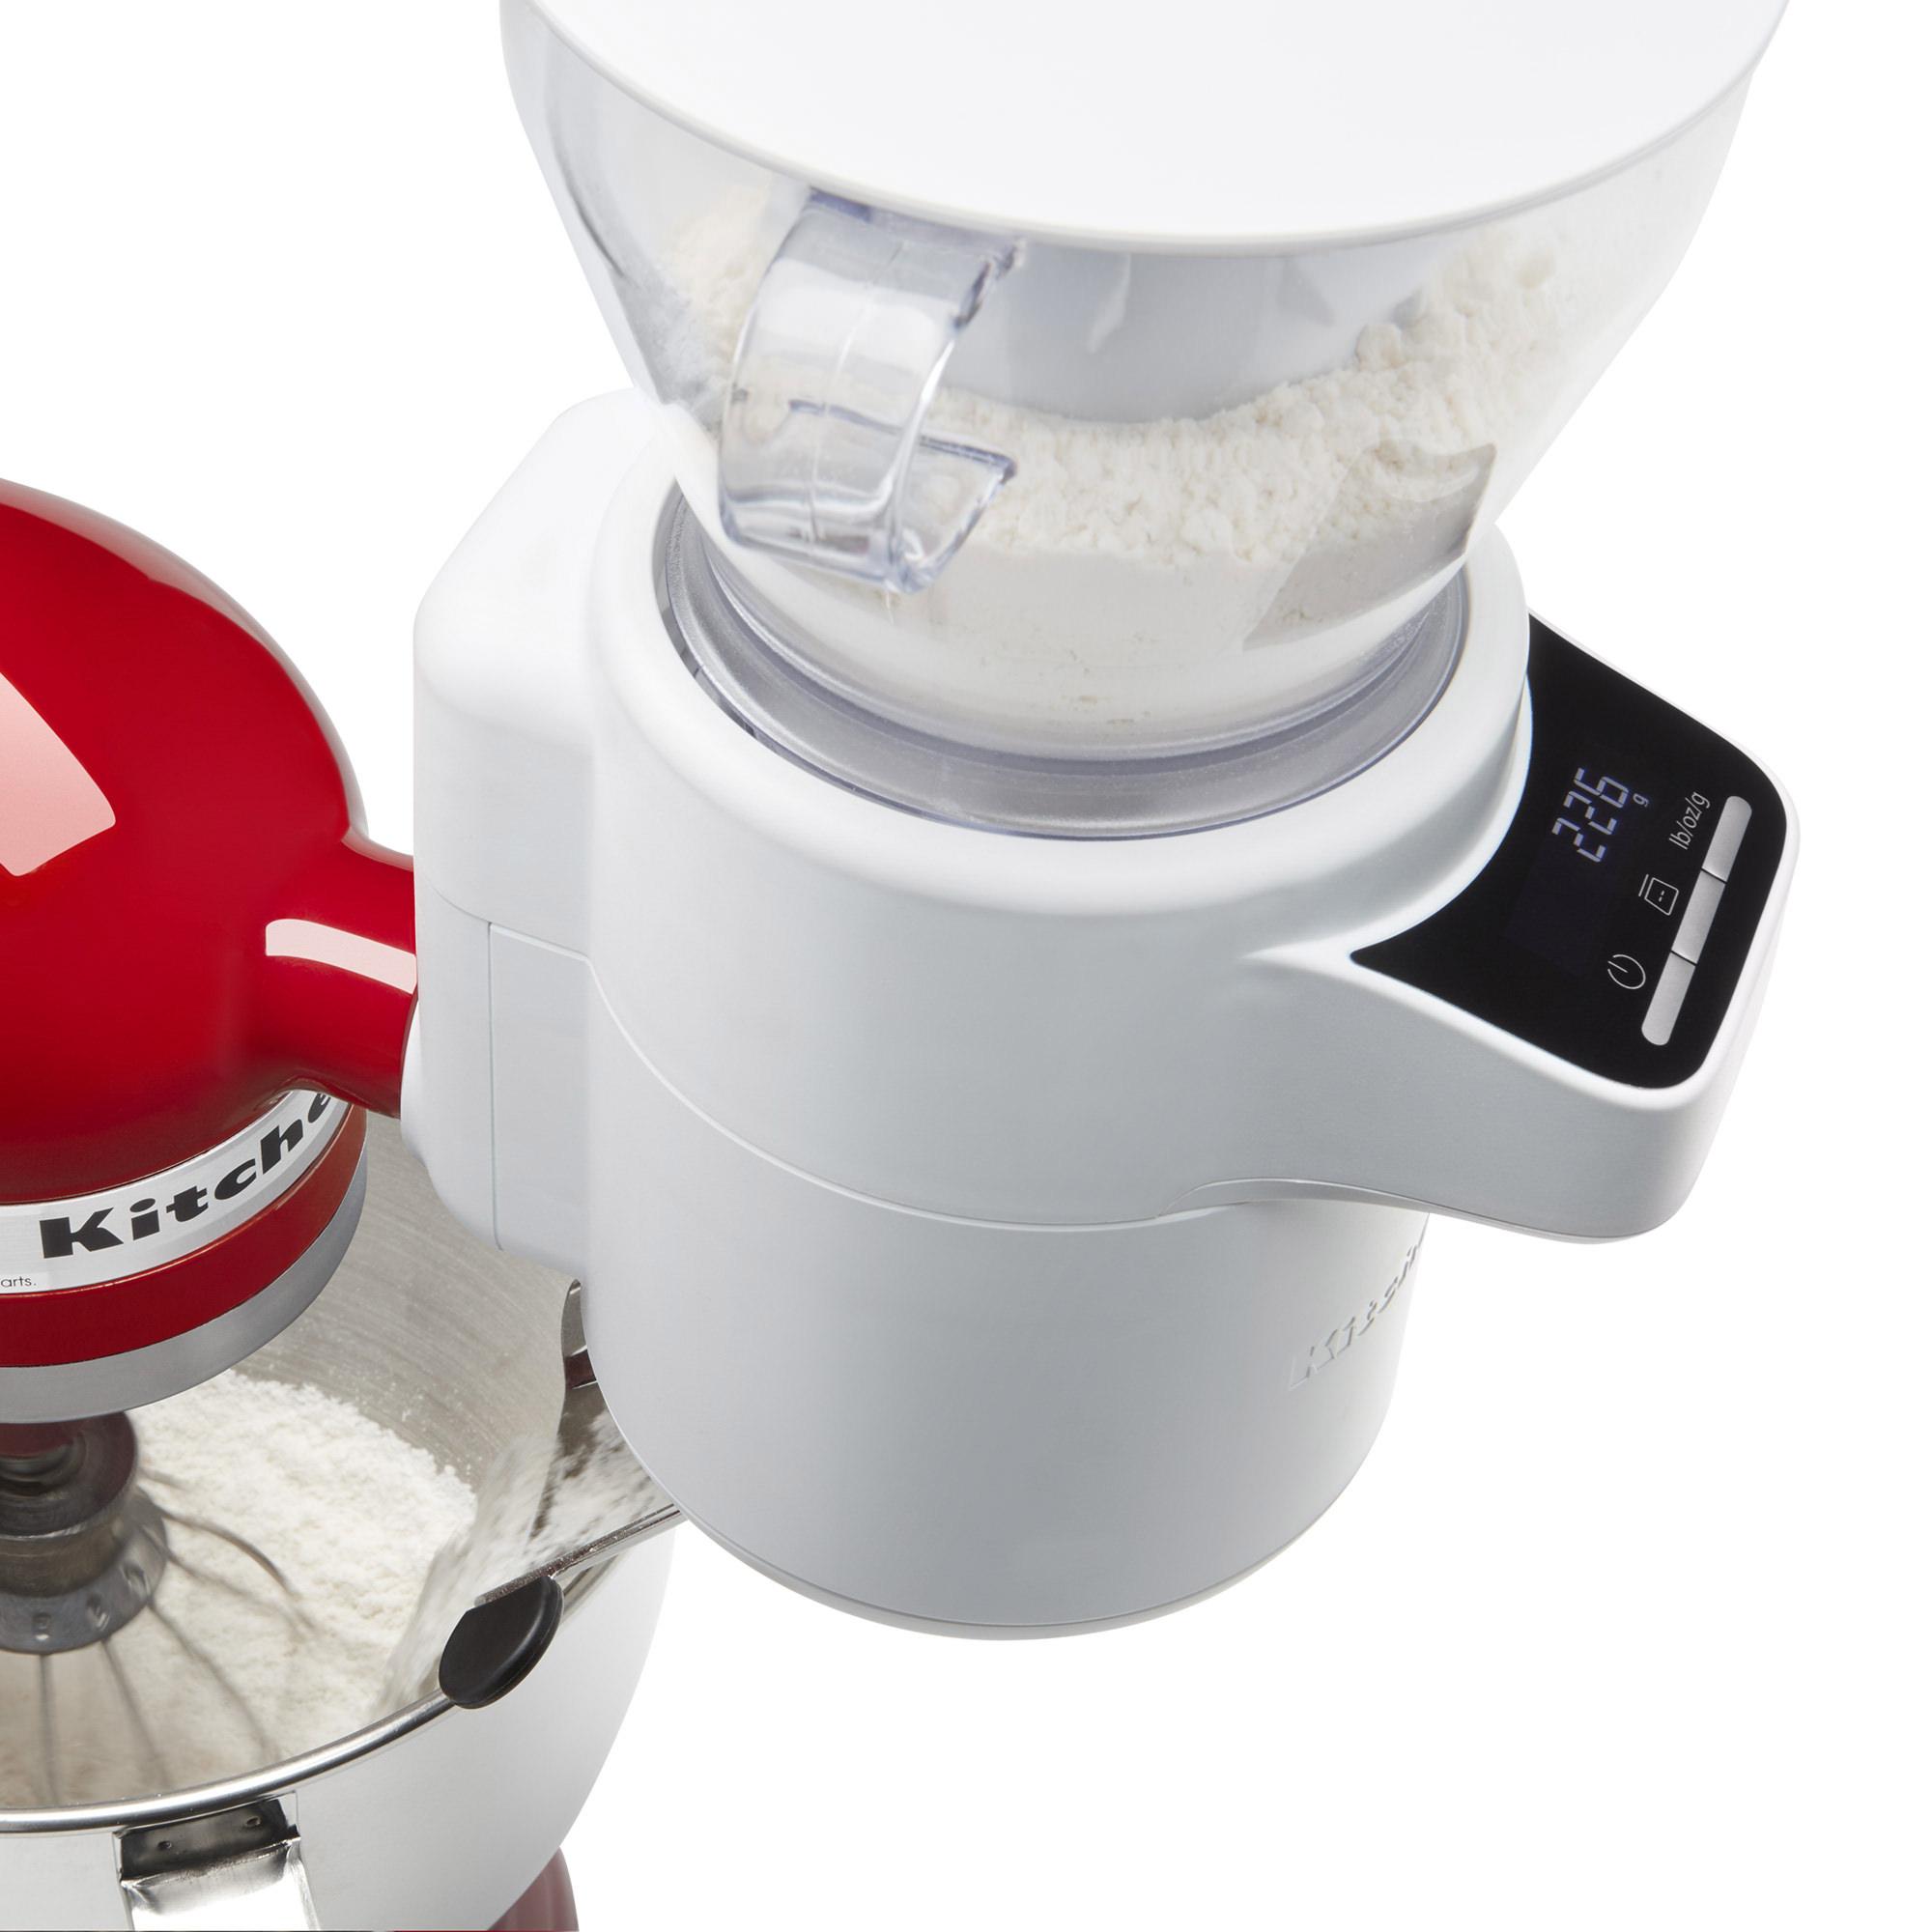 KitchenAid Sifter/Scale Attachment Image 5